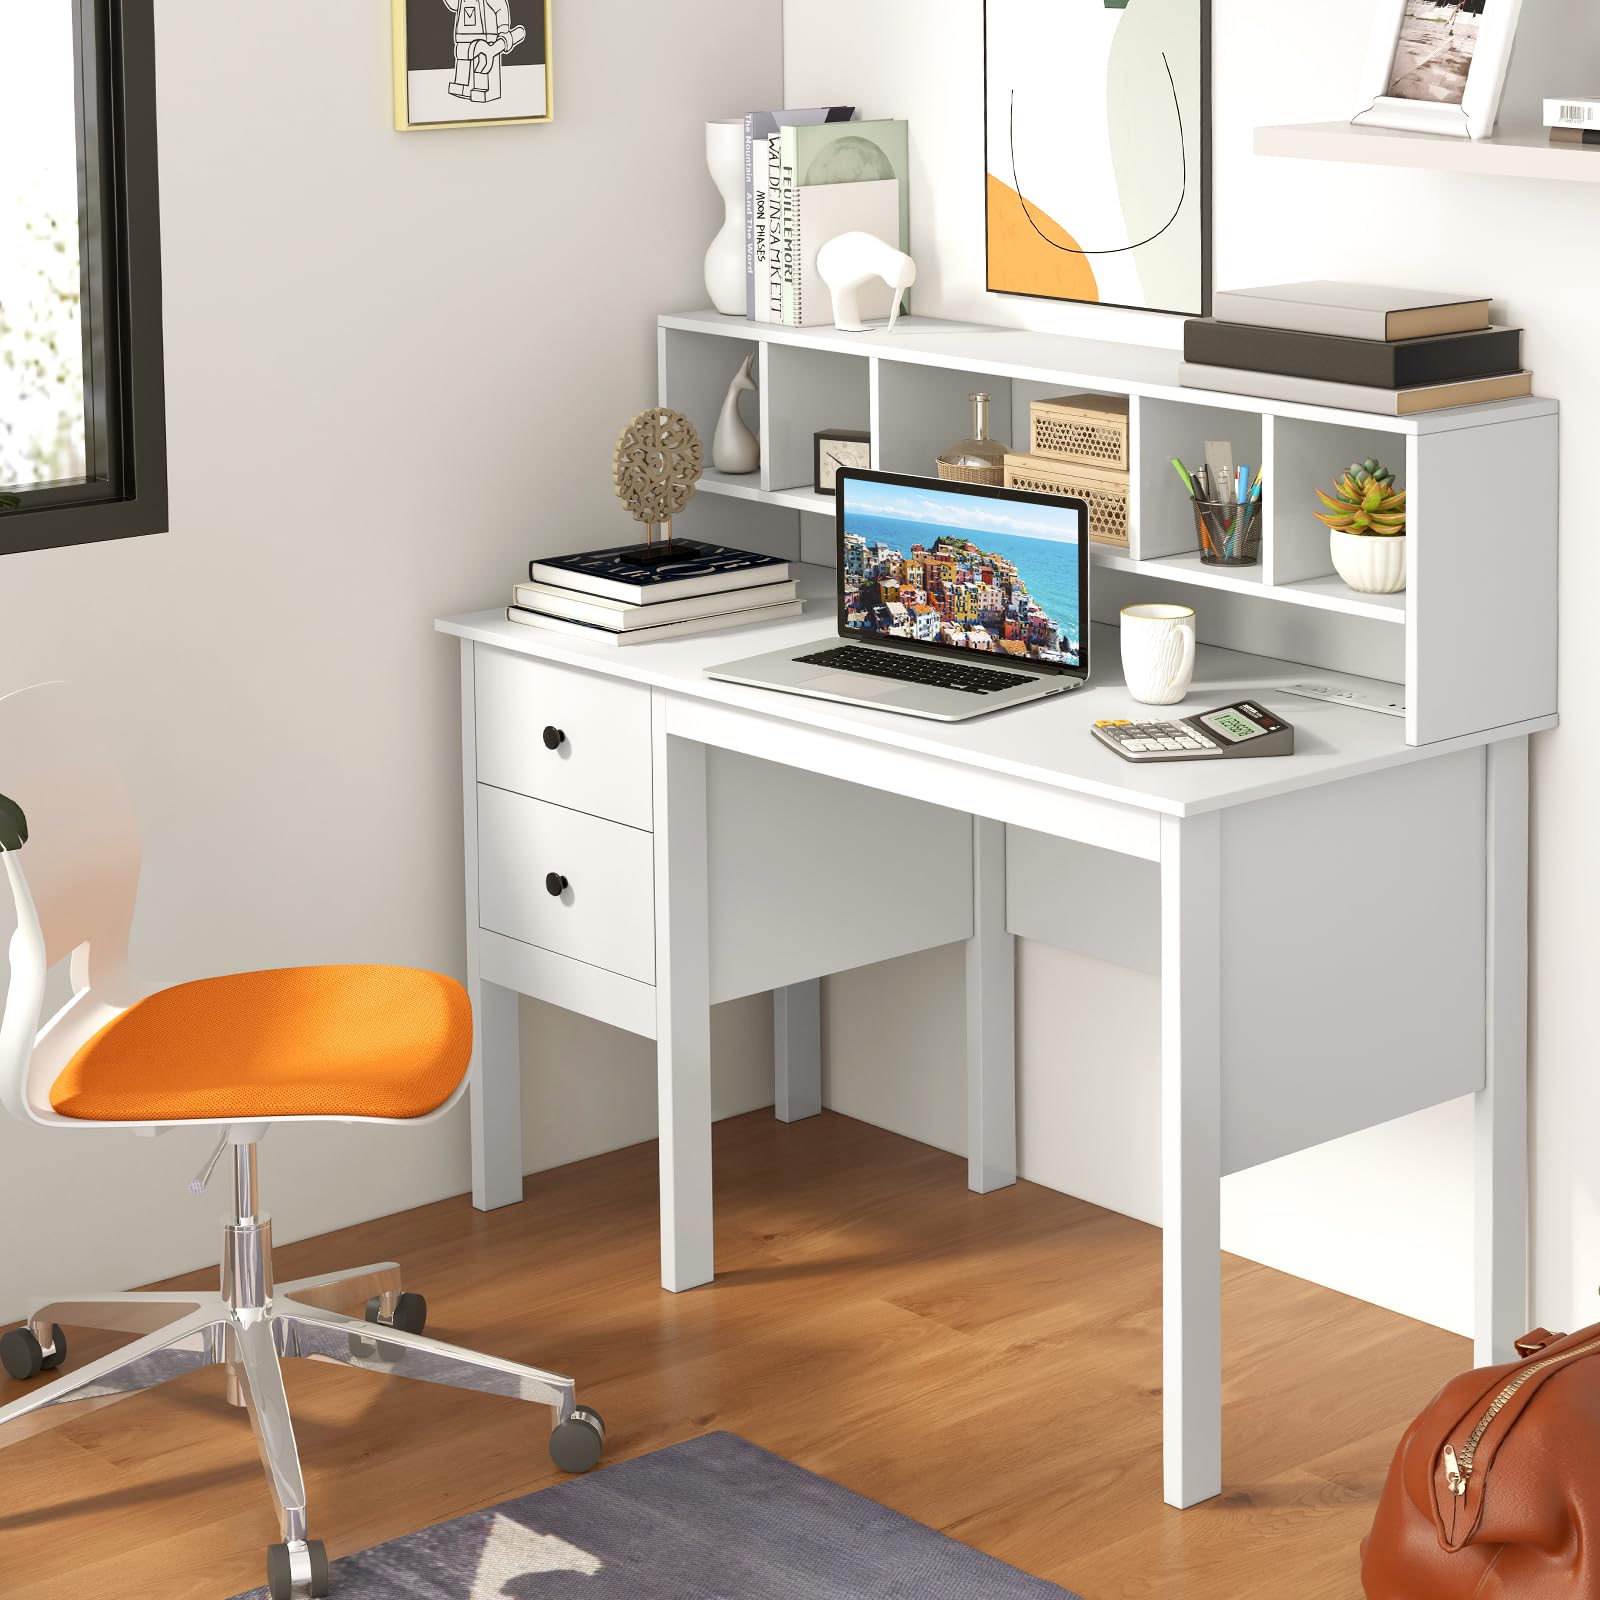 Giantex Home Office Desks, Computer Desk with Storage Shelves, Writing Desk  for Student and woker, Writing Study, Industry Modern Table for Bedroom